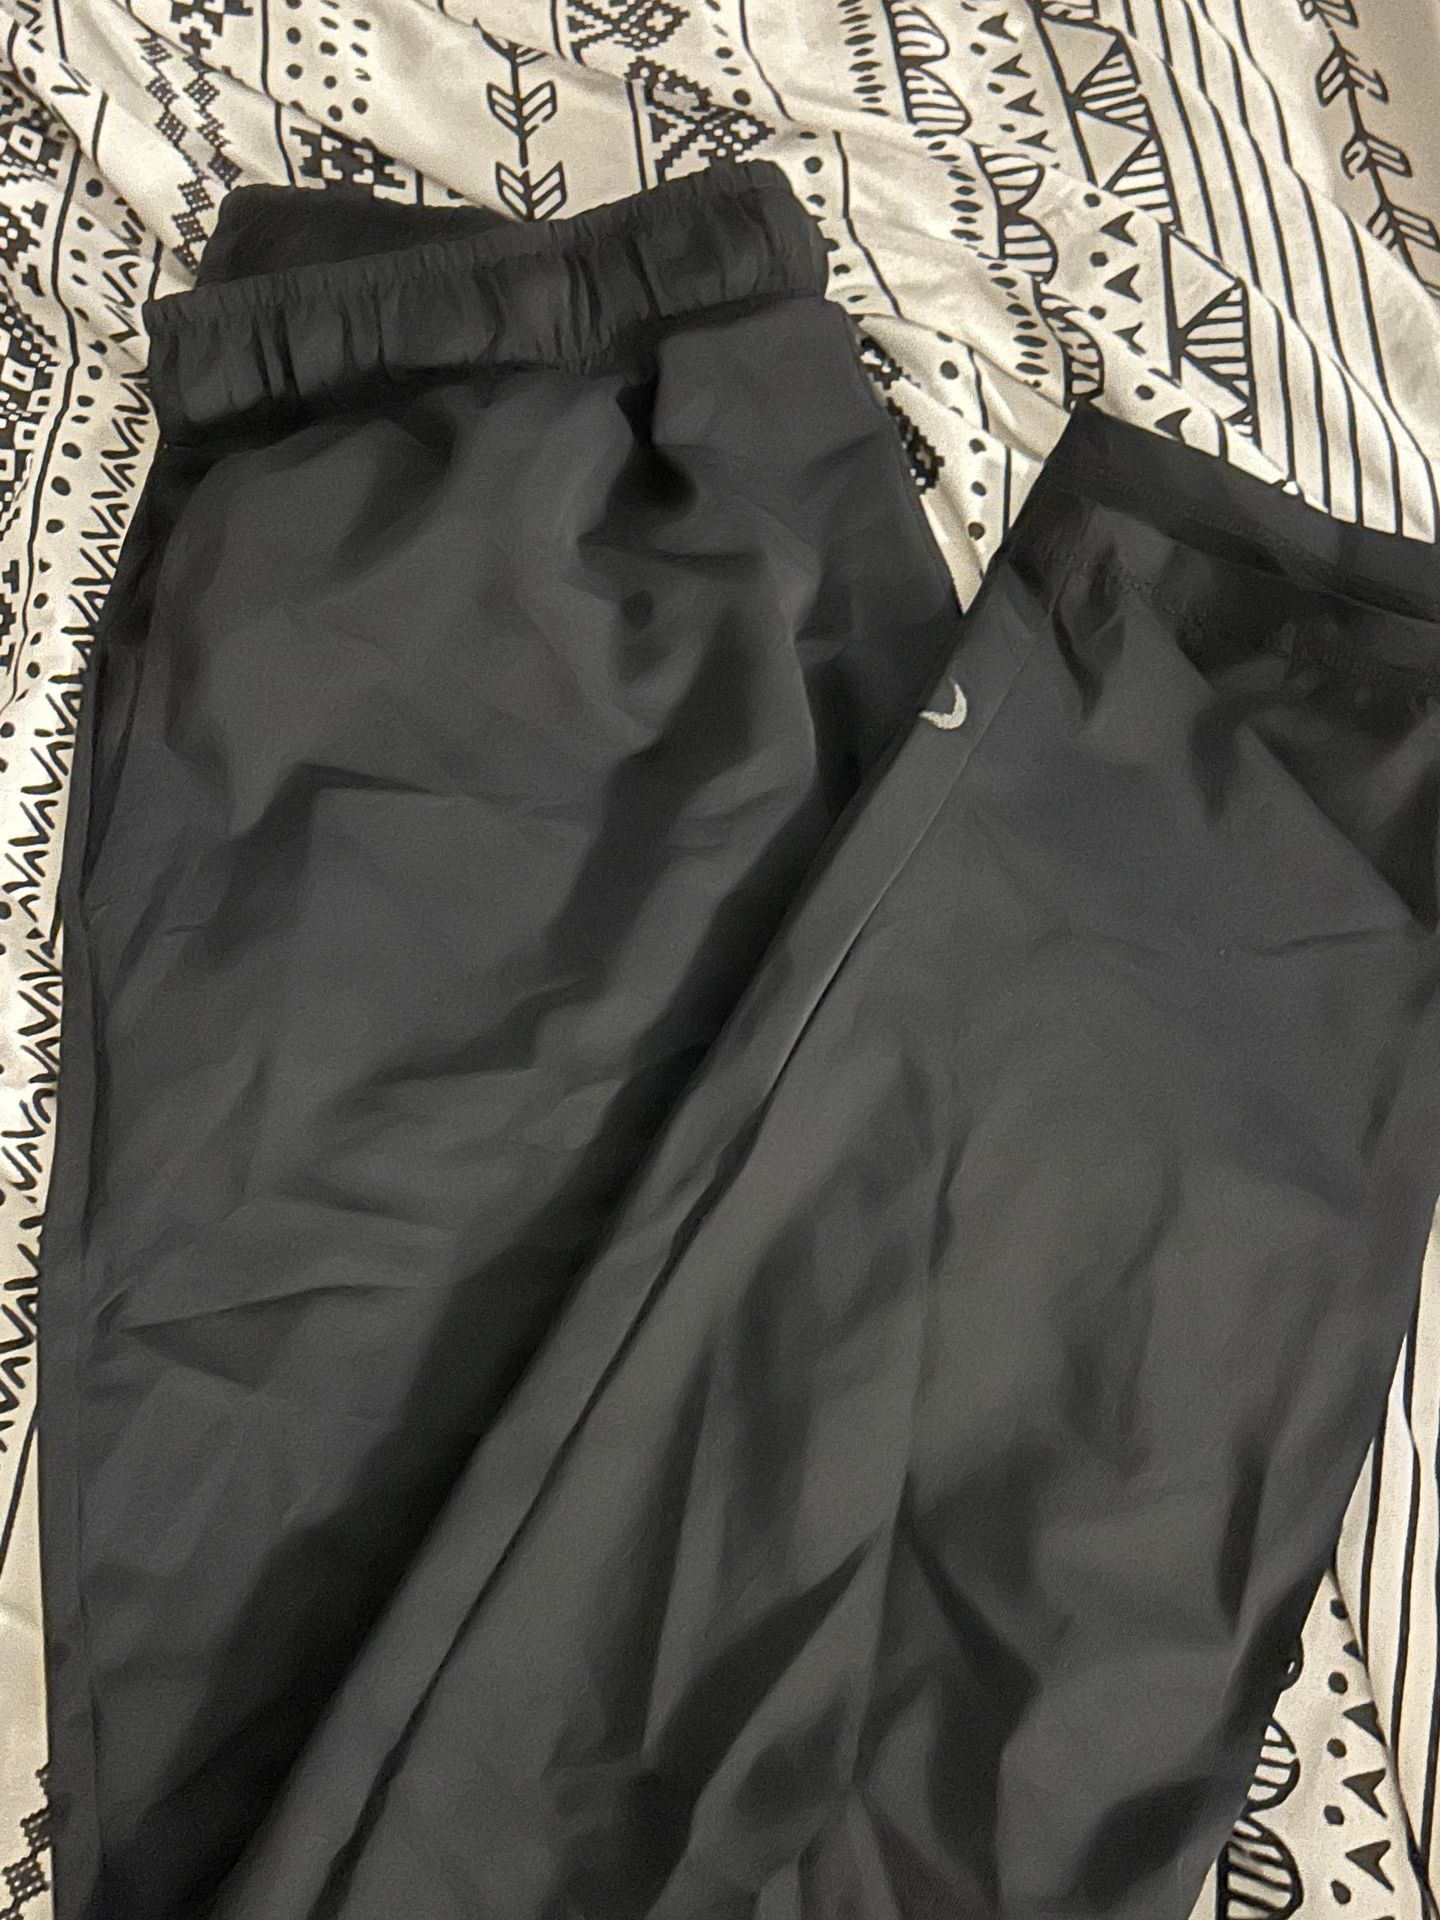 Zyia joggers Black Size M - $14 - From Casey